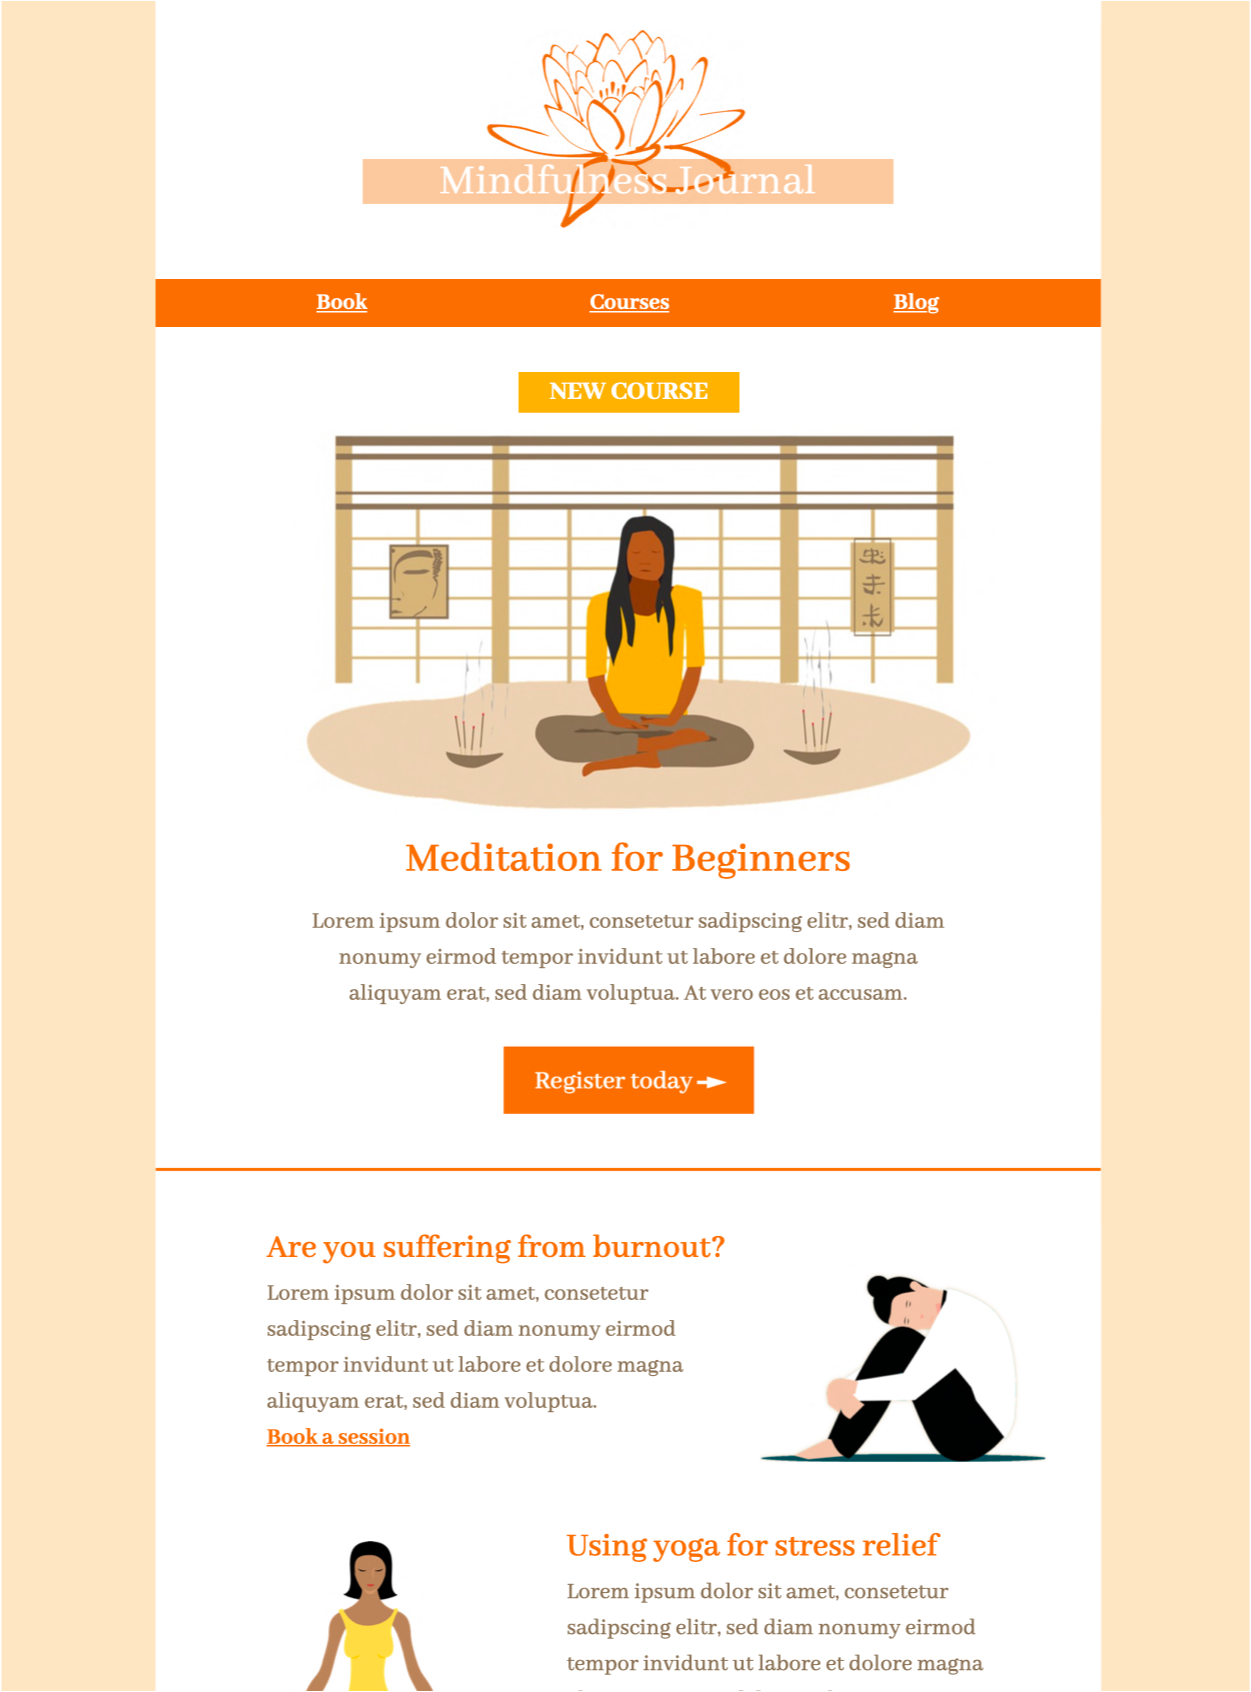 html email newsletter for mindfulness and mental health tips available in Mail Designer 365